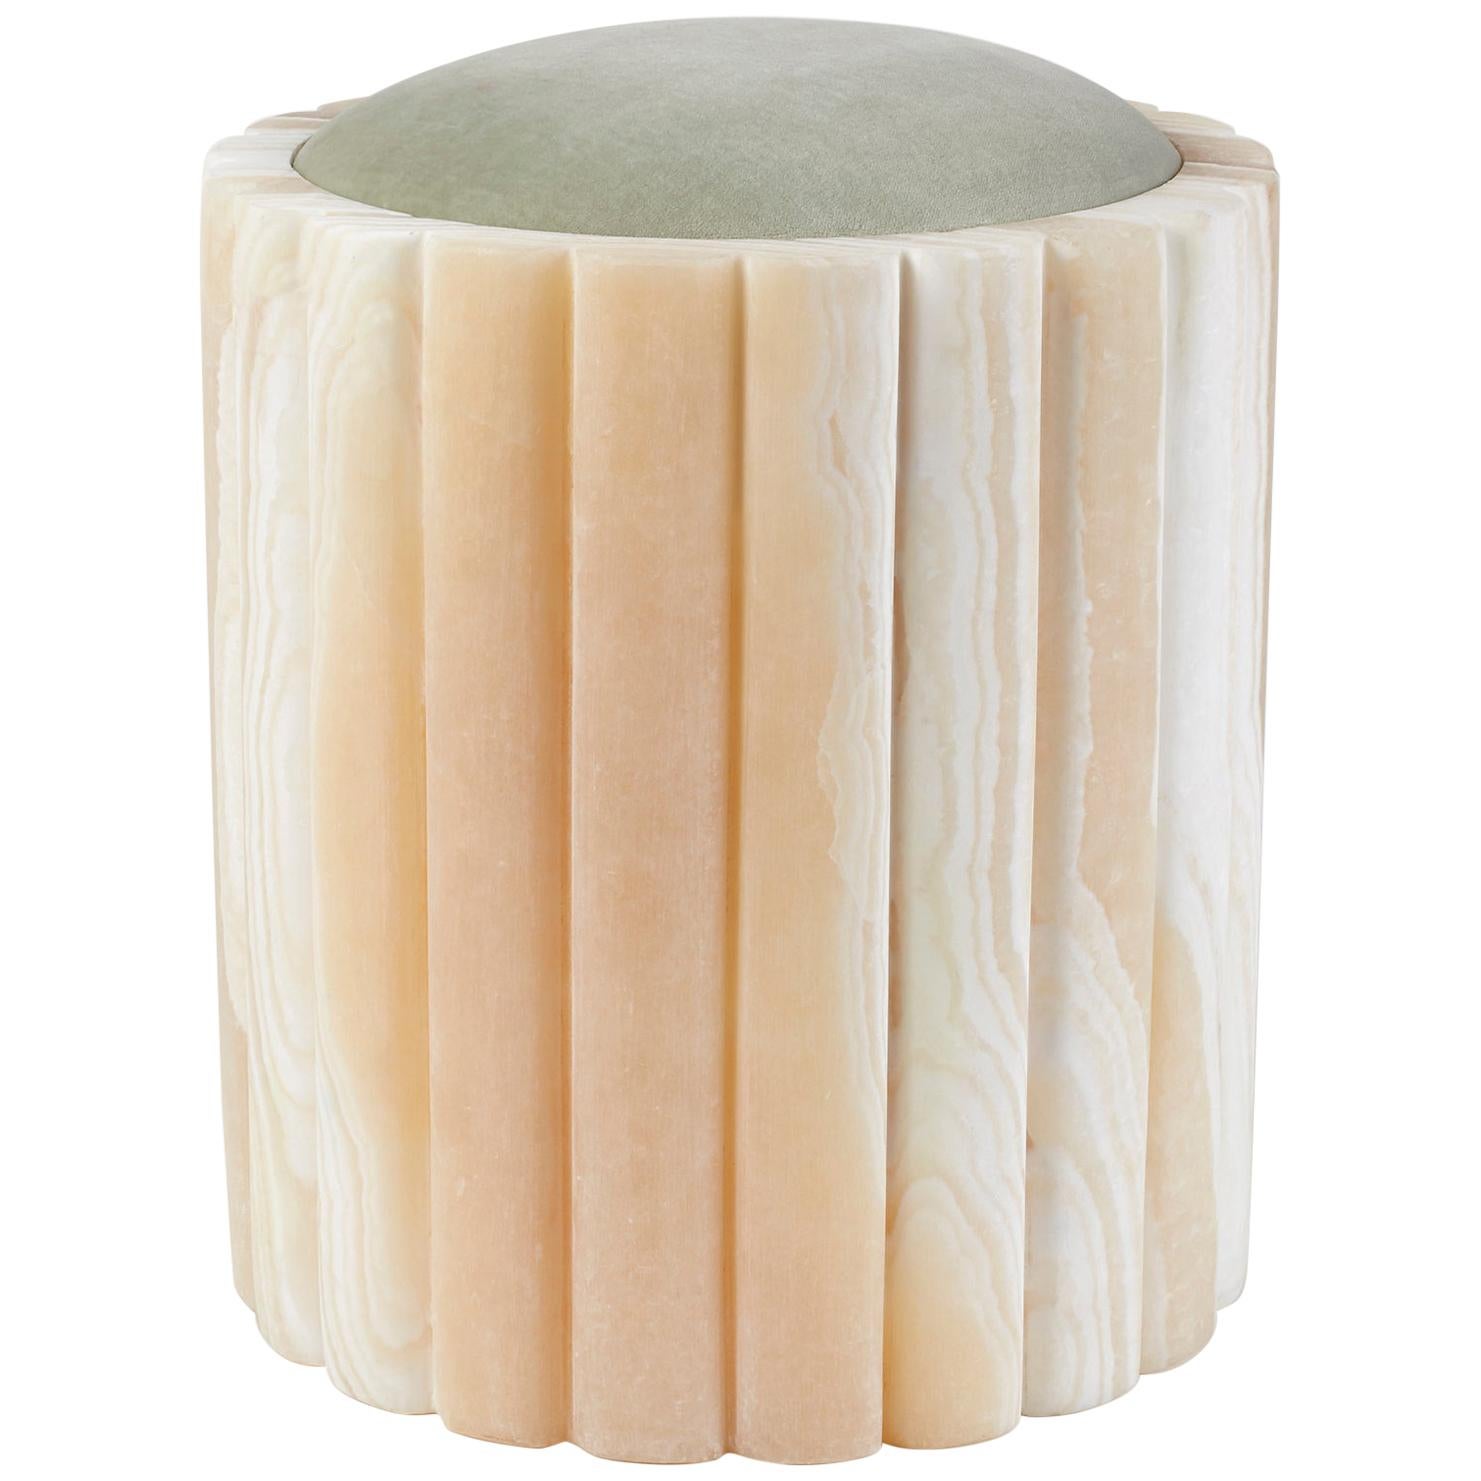 Marguerite Alabaster Stool Sculpted by Omar Chakil